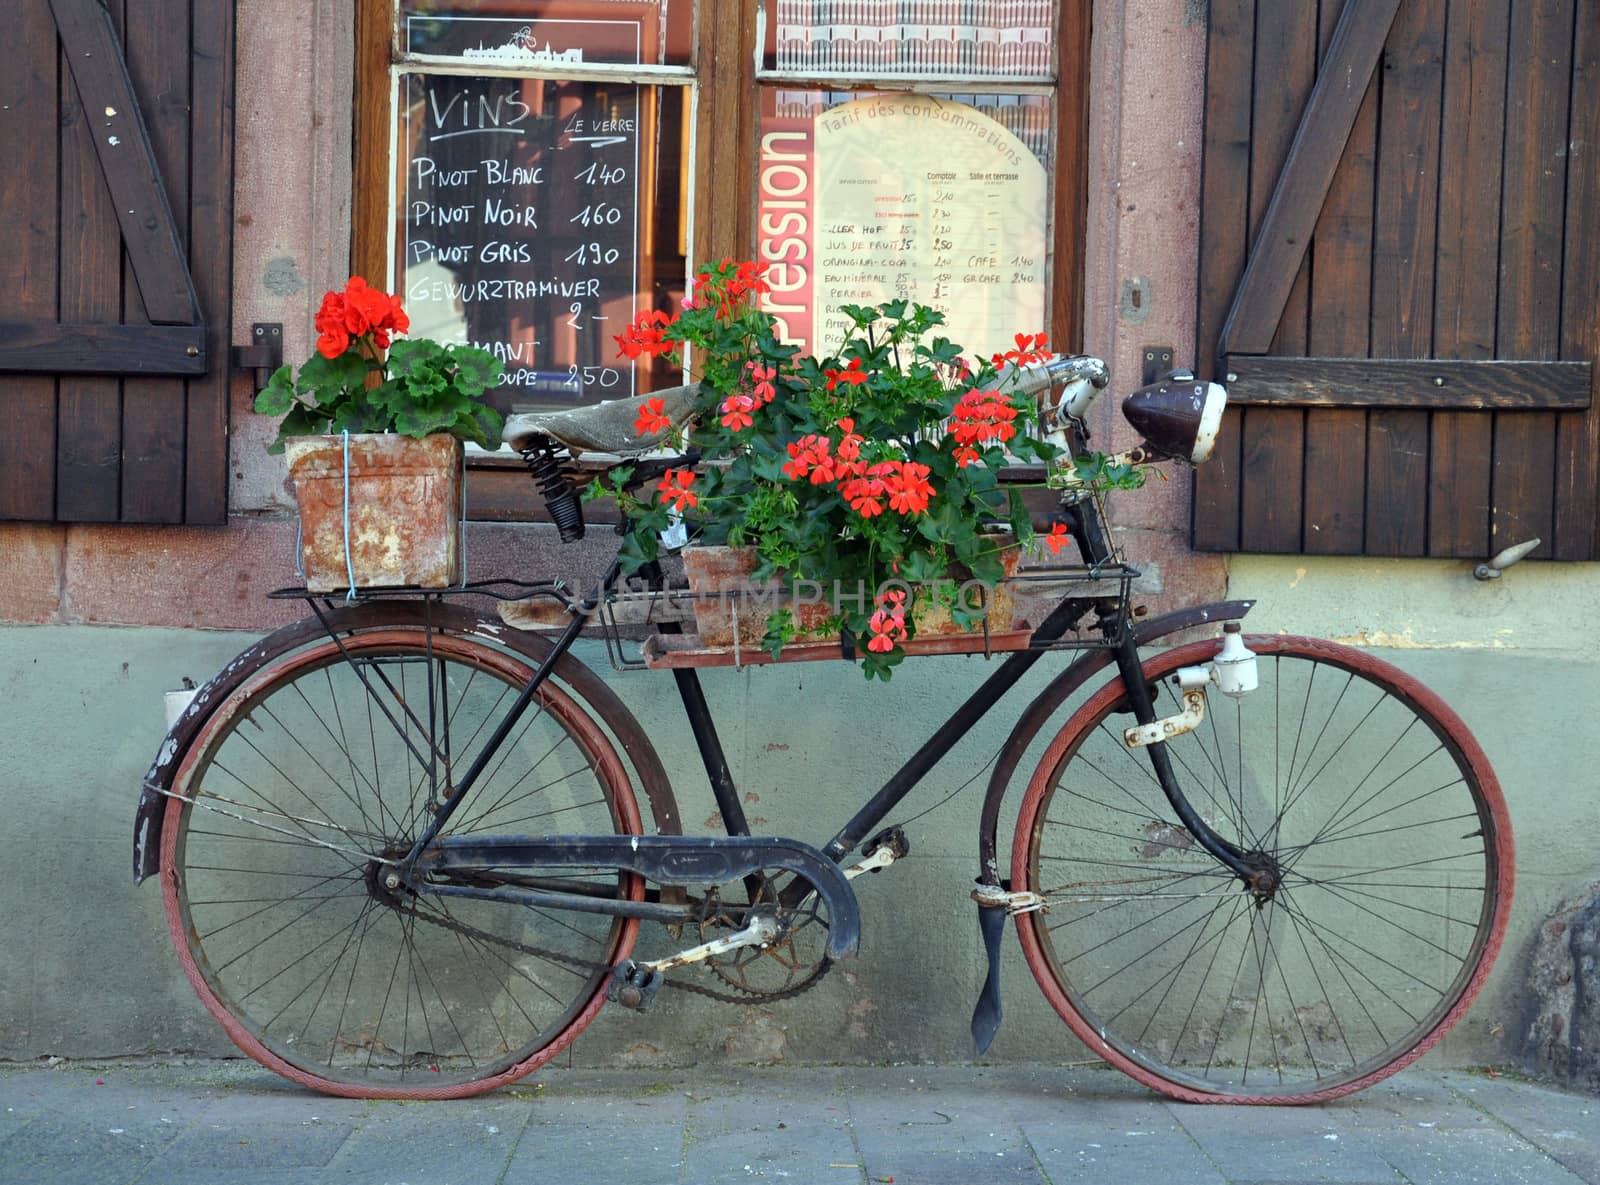 An old bike outside a French Cafe in Alsace in eastern France, but typical of French rural cafes throughout the land.